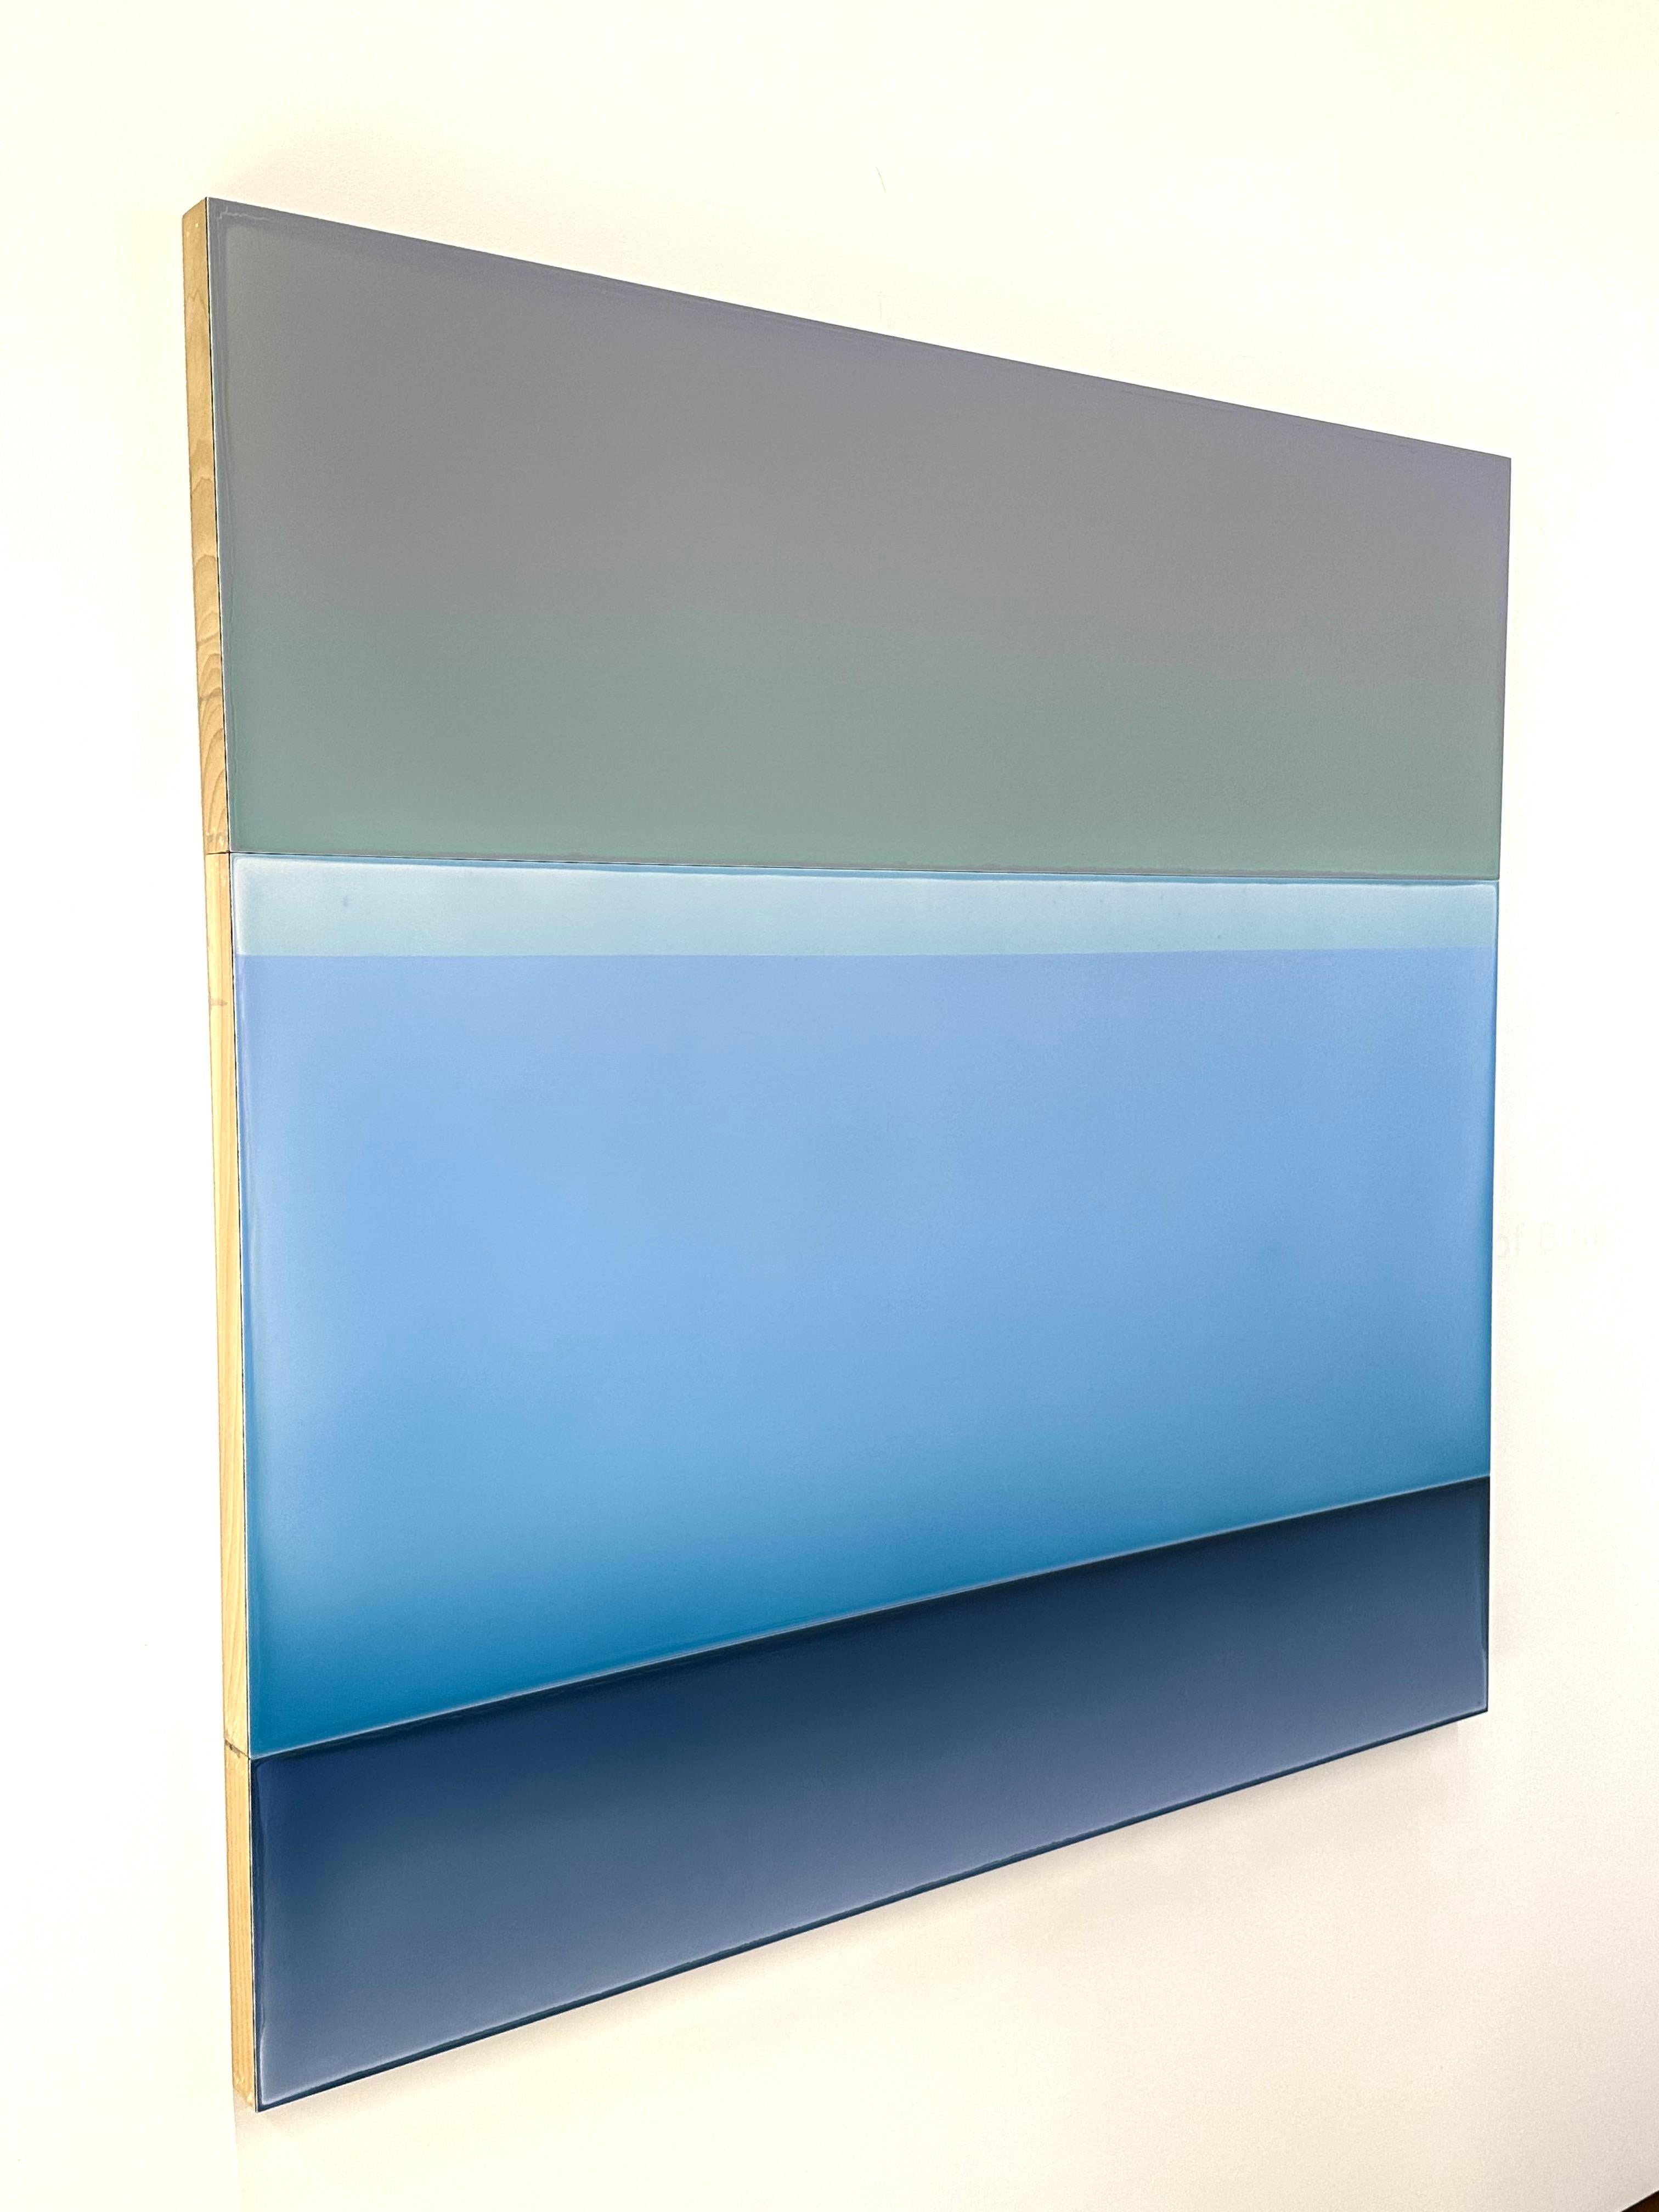 Cloud Shadow (FS) by Susan English is a wonderful play of color, light, and composition. The layers of English's tinted polymer on aluminum create the depth and surface textures throughout the painting, which is composed of three panels. The dark